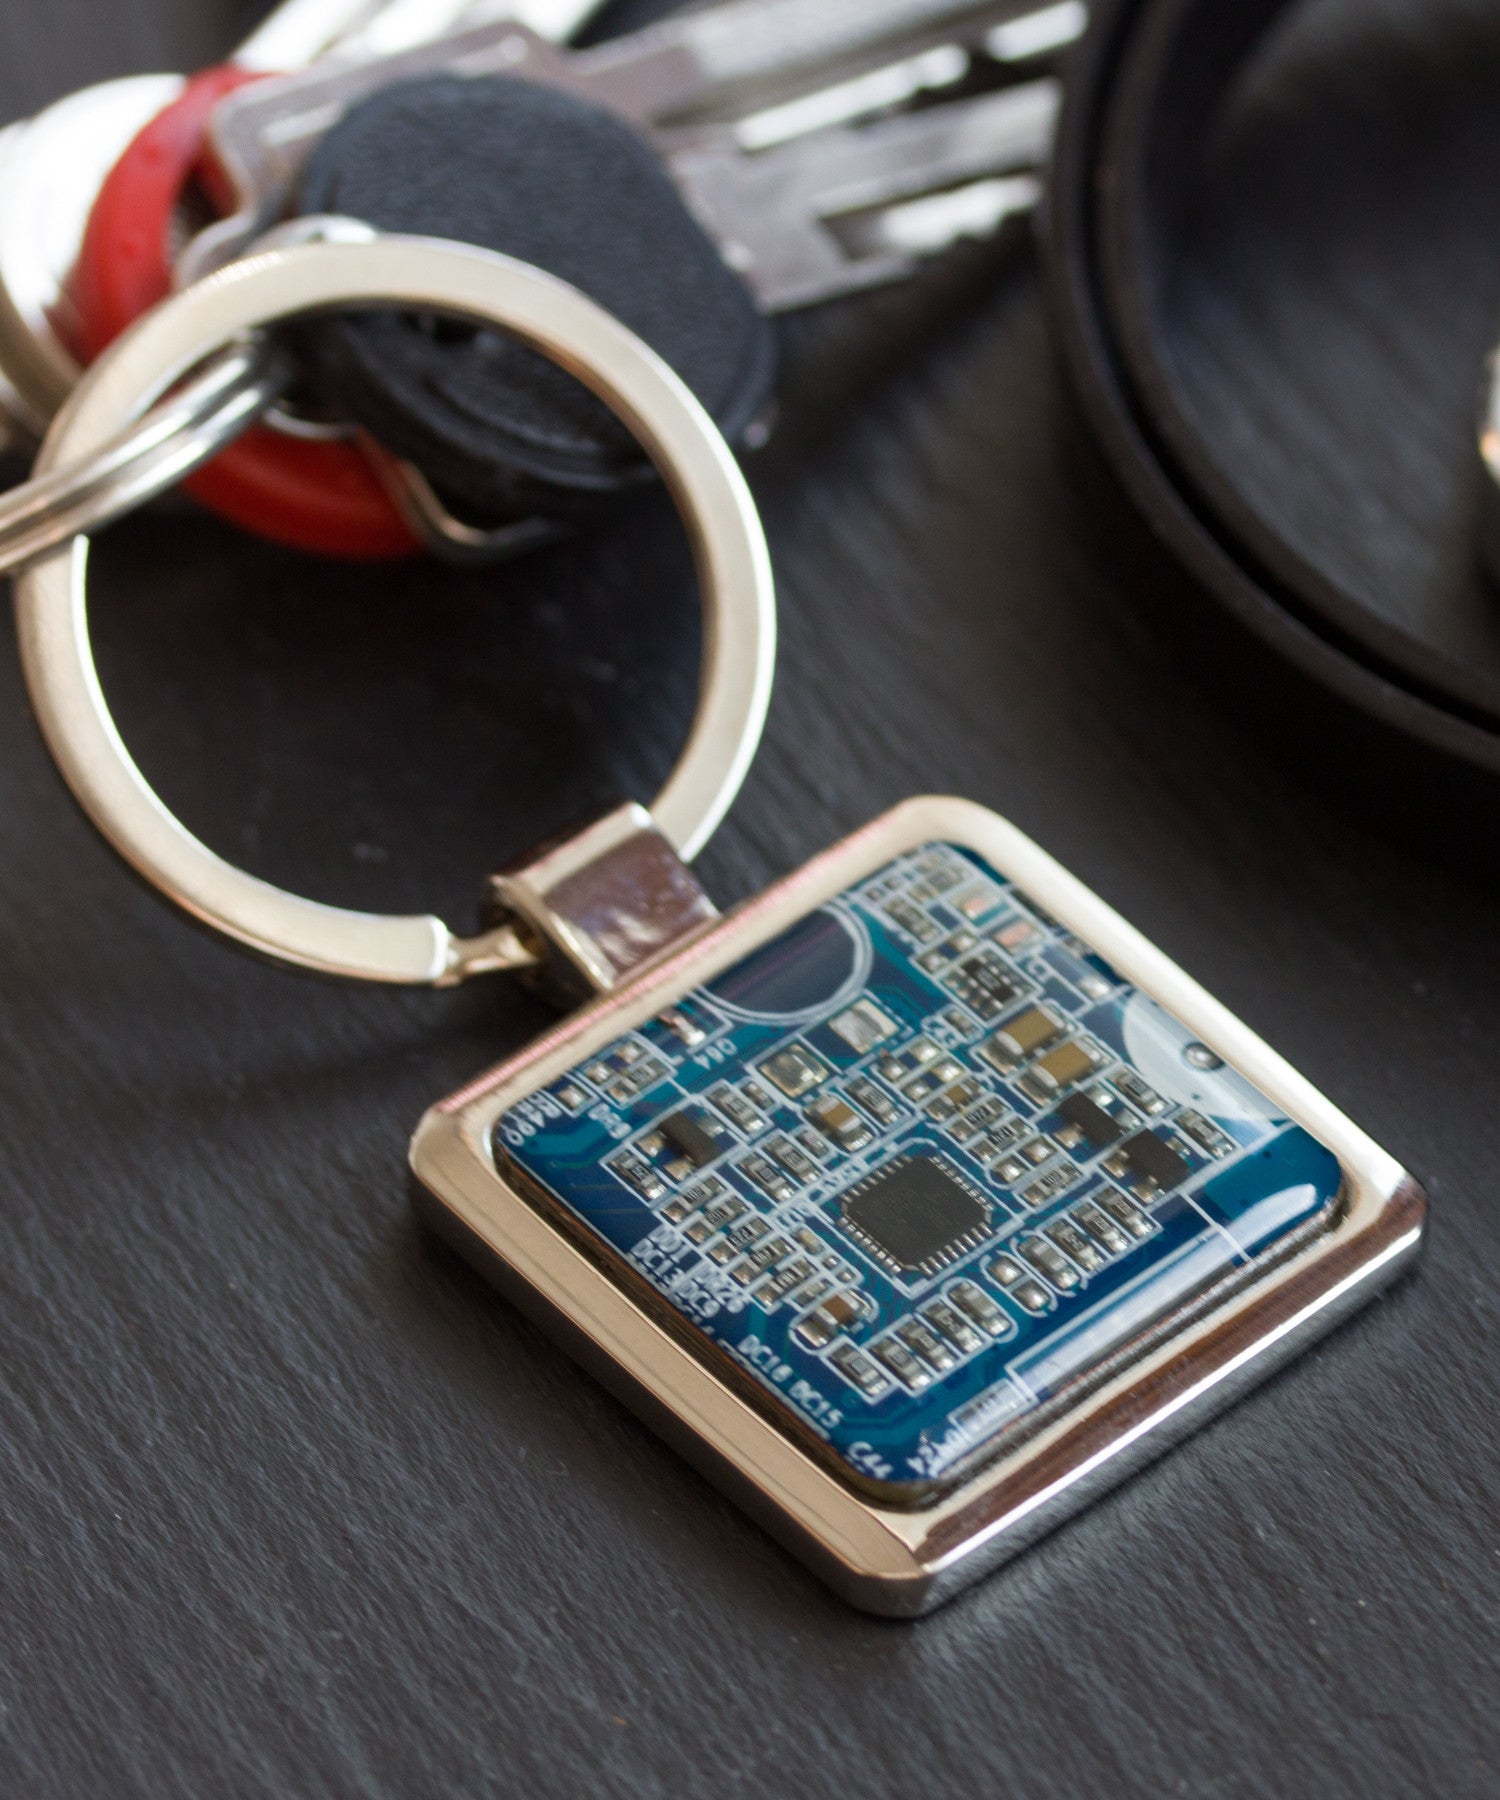 Unique keychain with circuit board piece